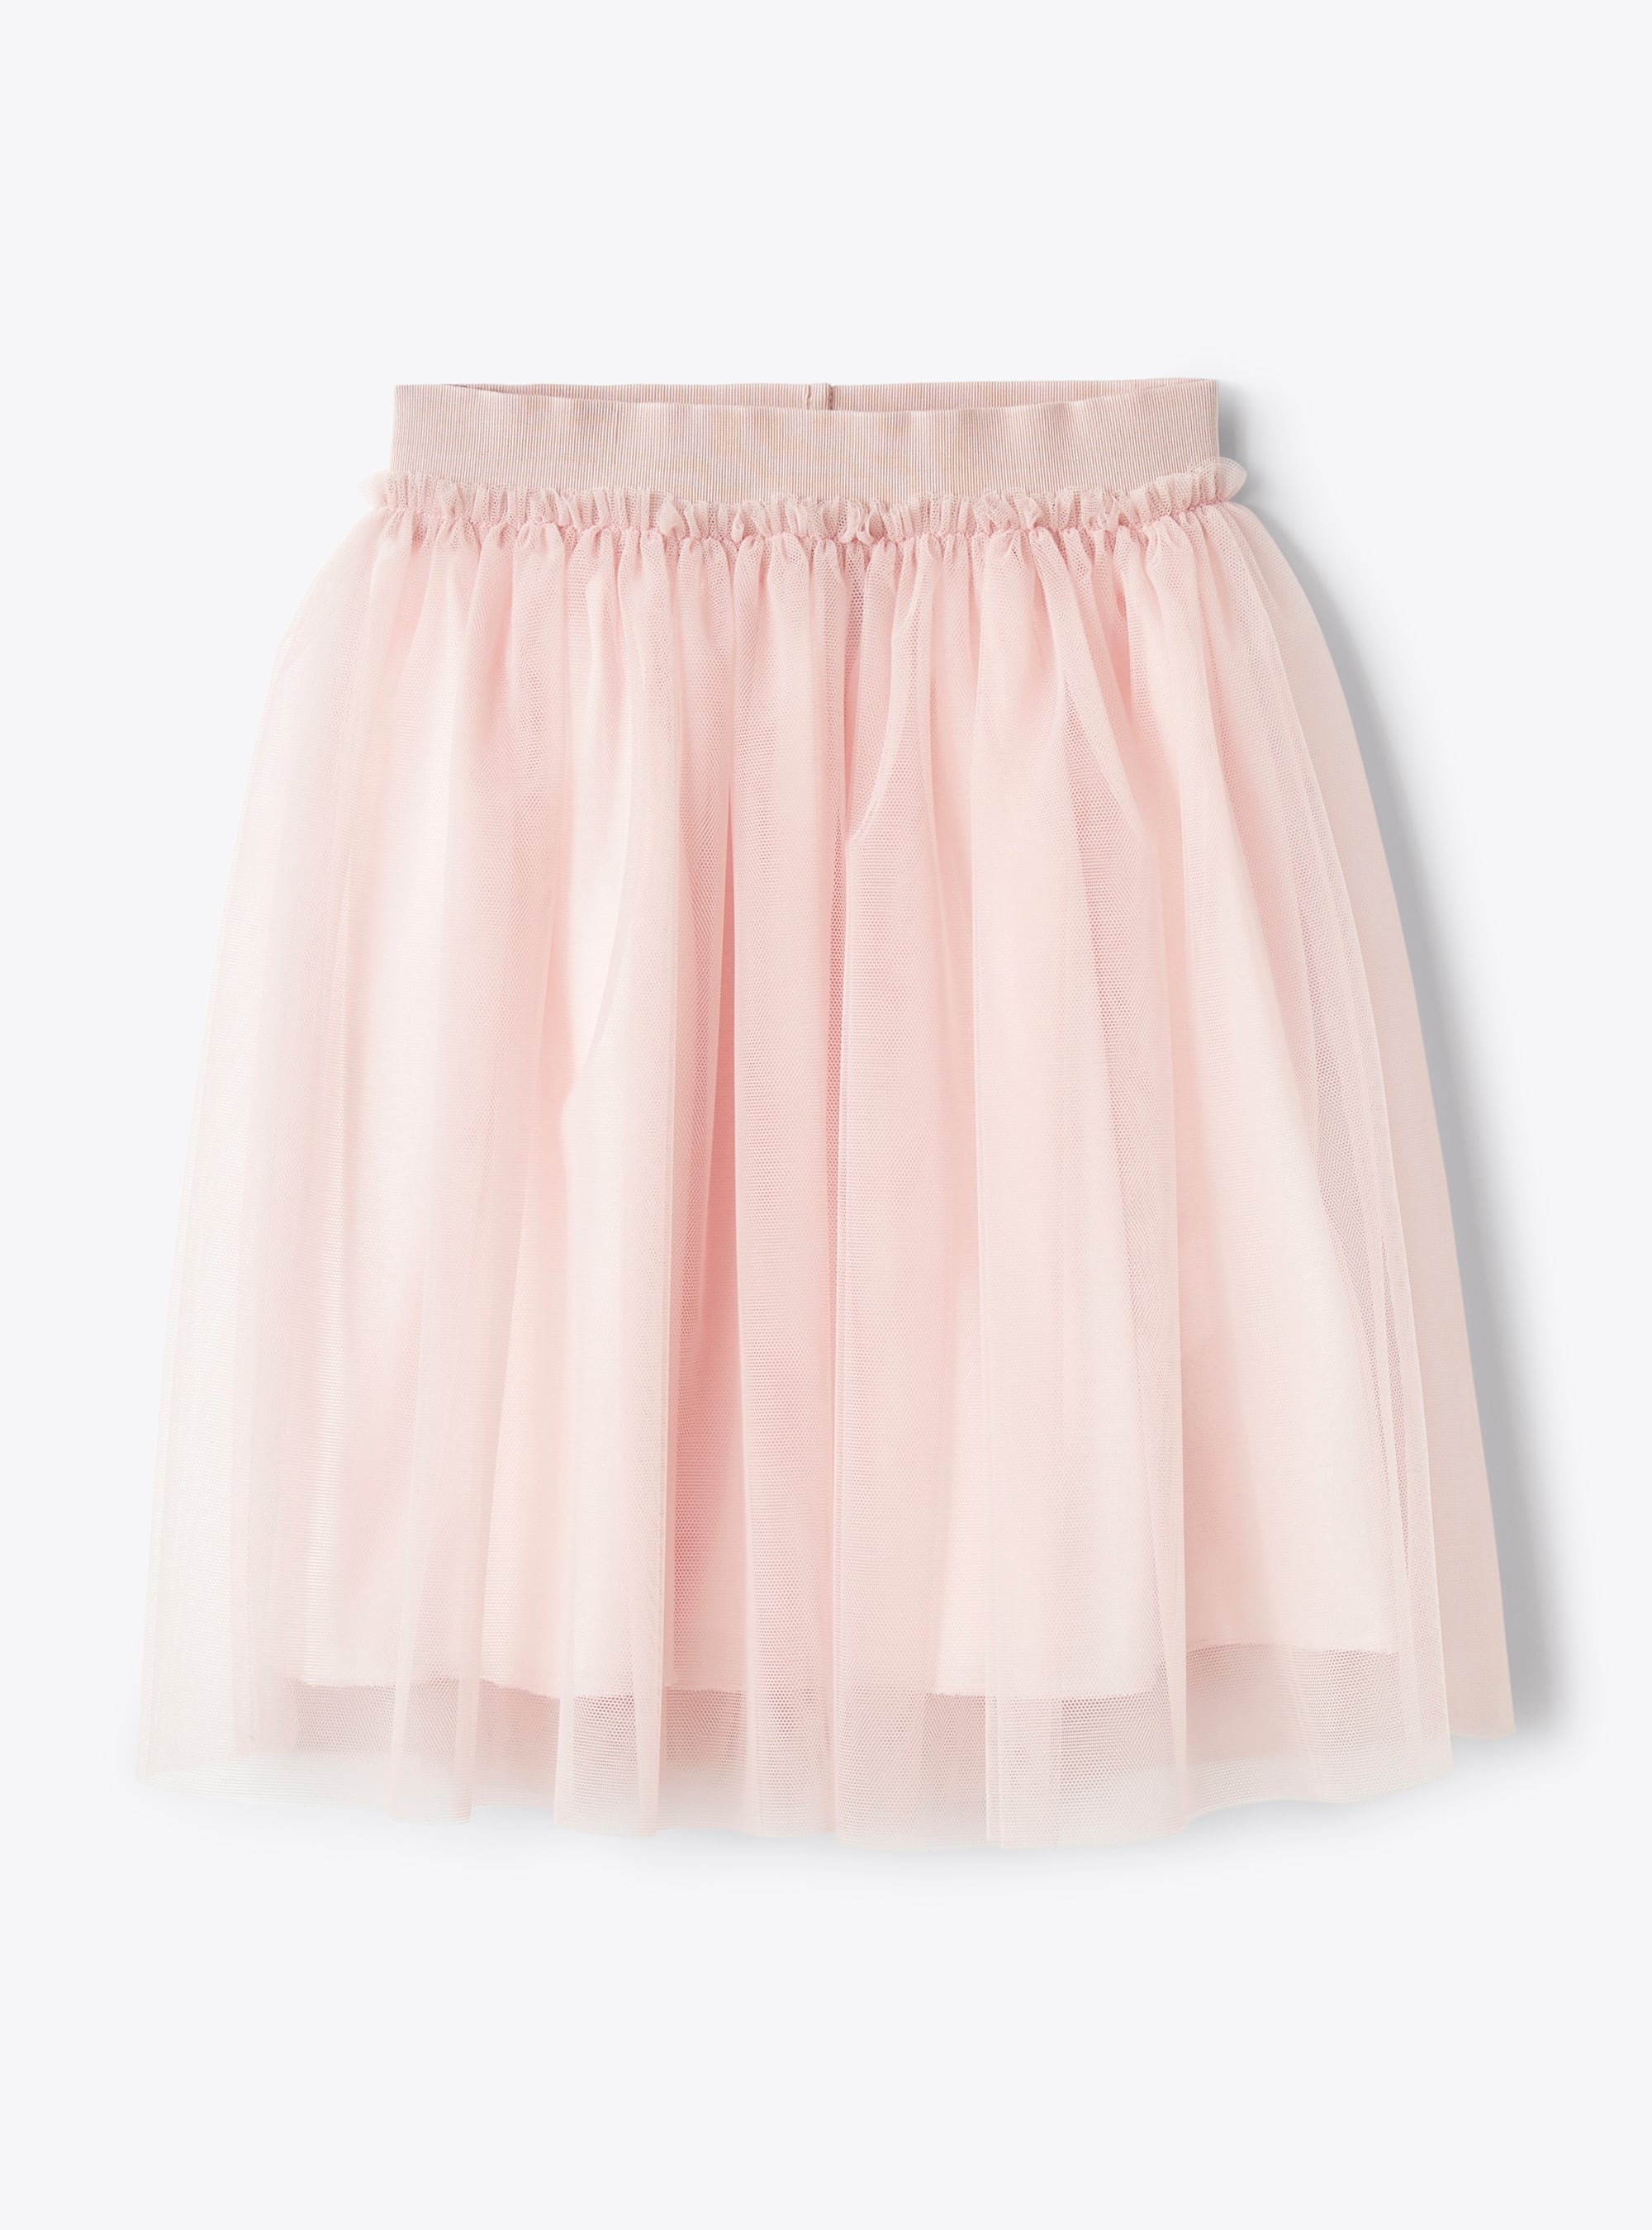 Skirt in antique-rose tulle - Skirts - Il Gufo